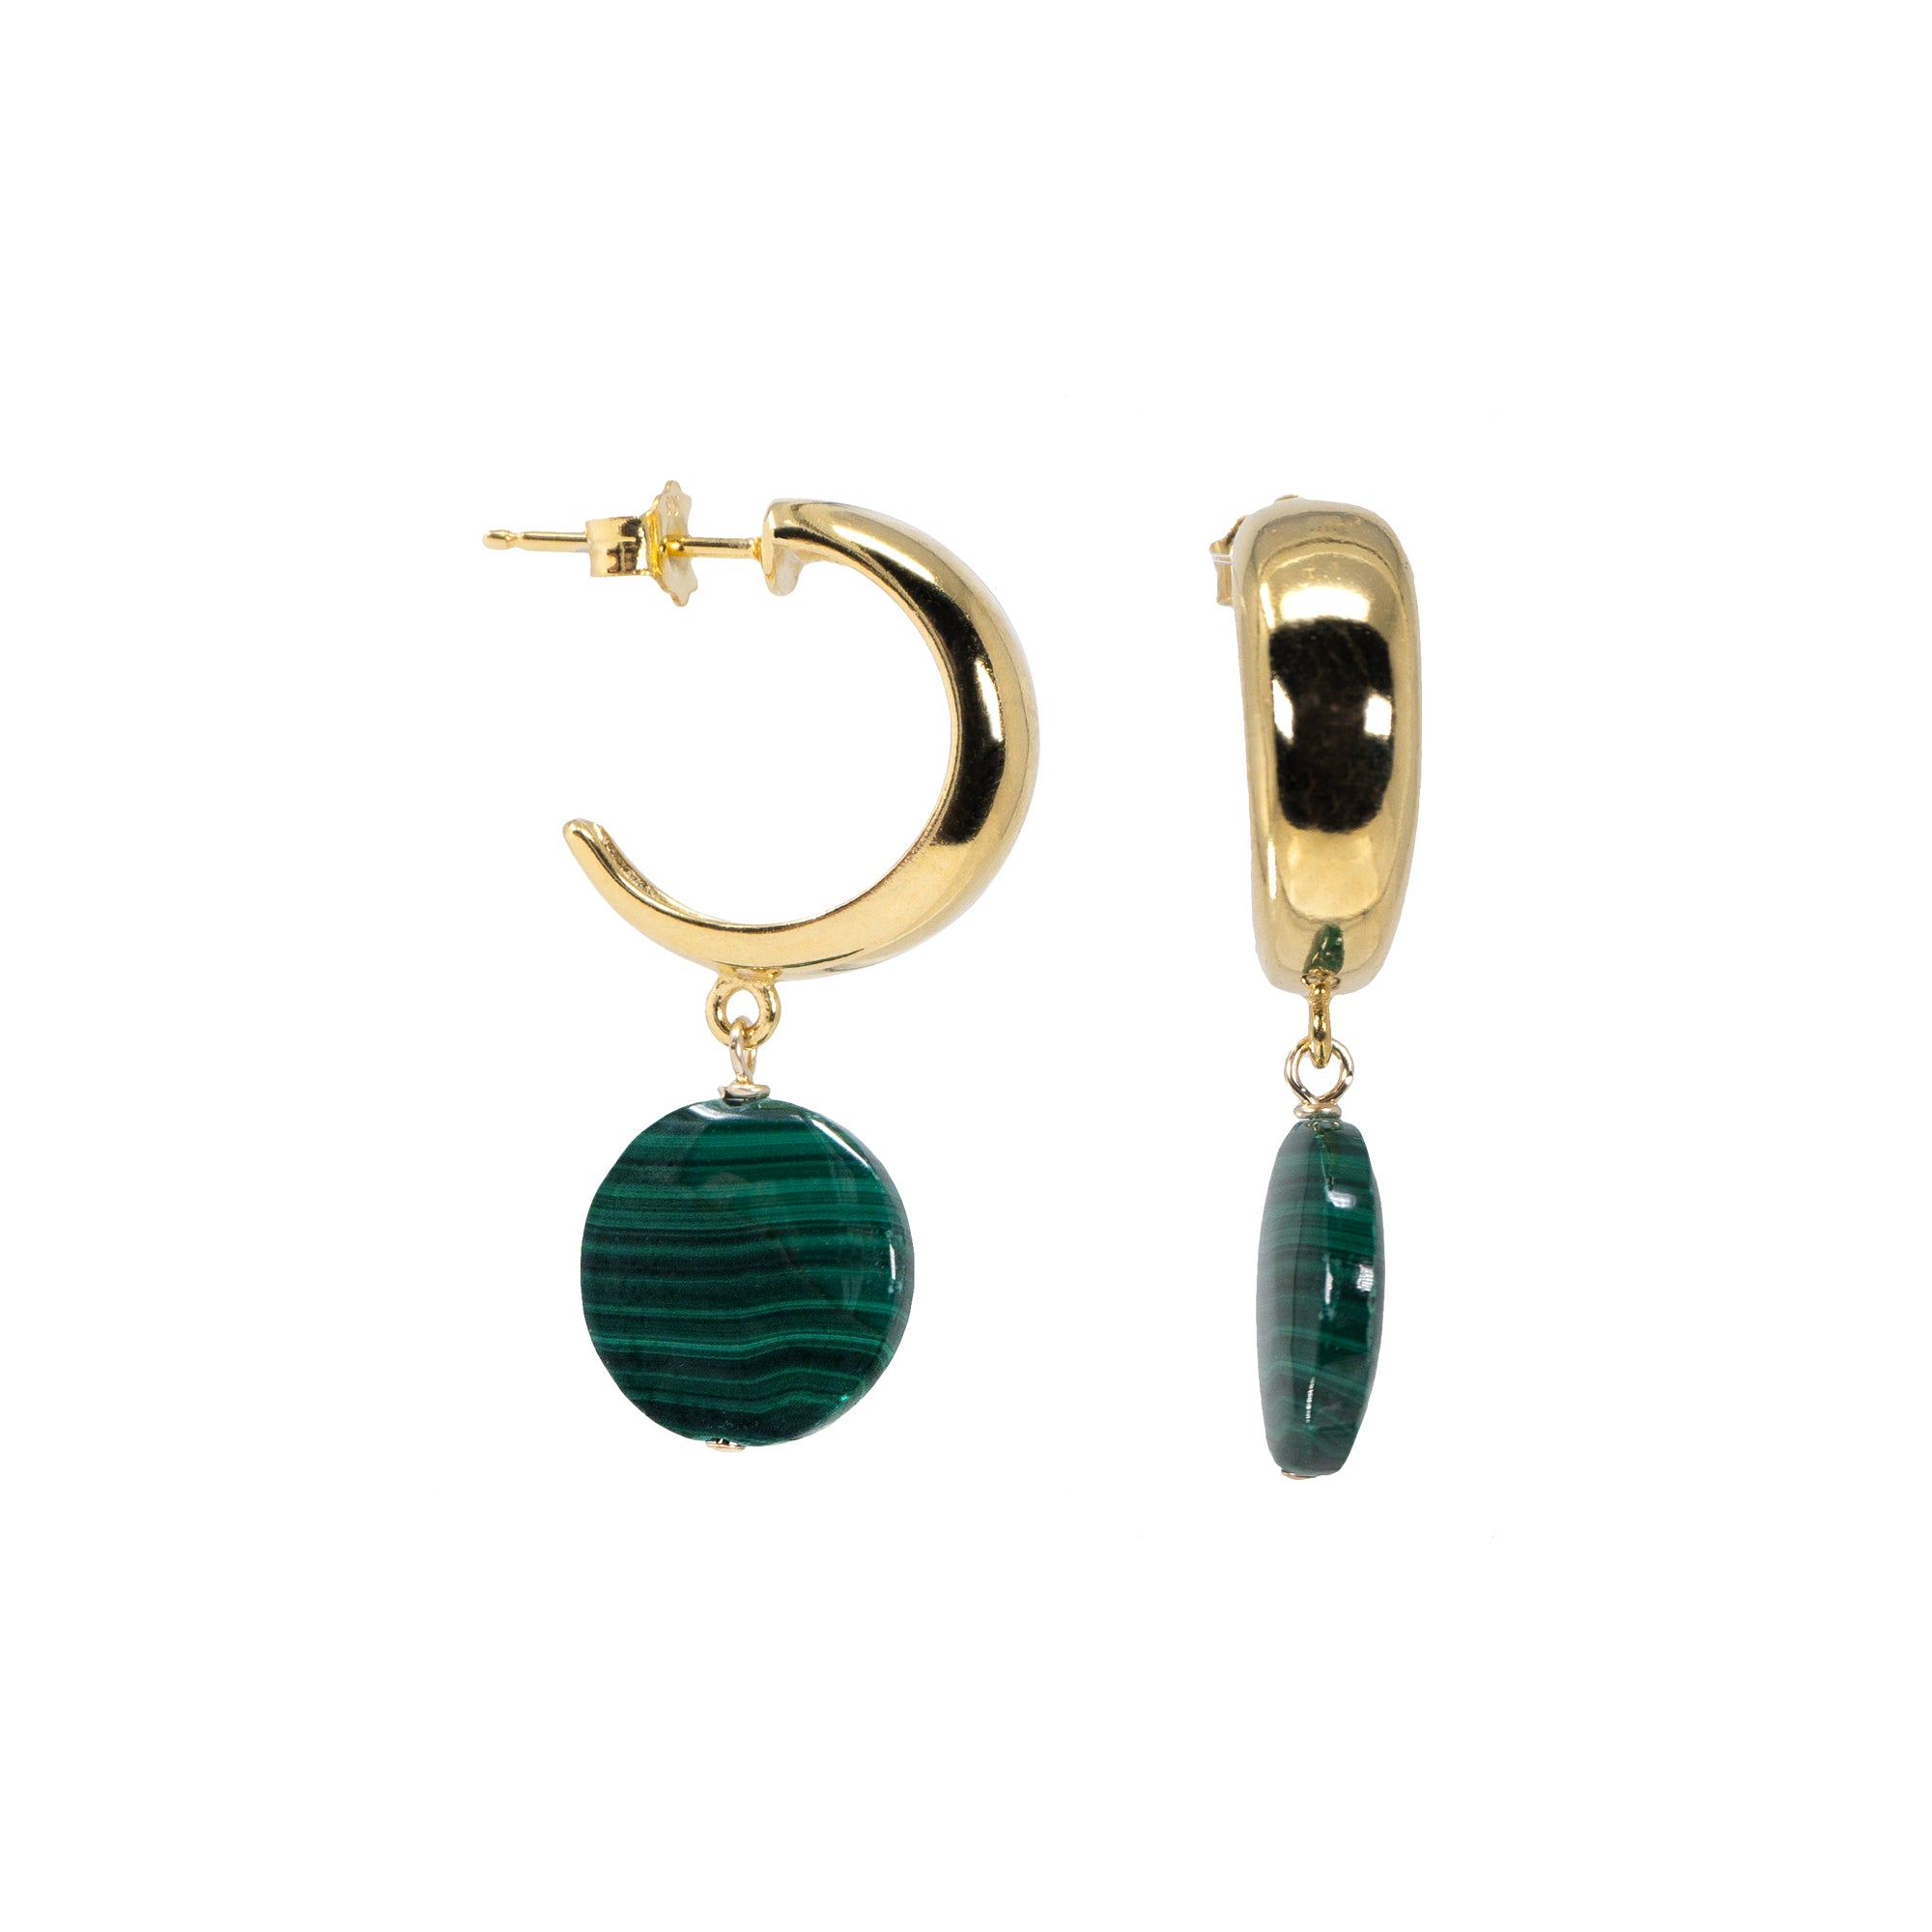 Gold filled hoops with malachite